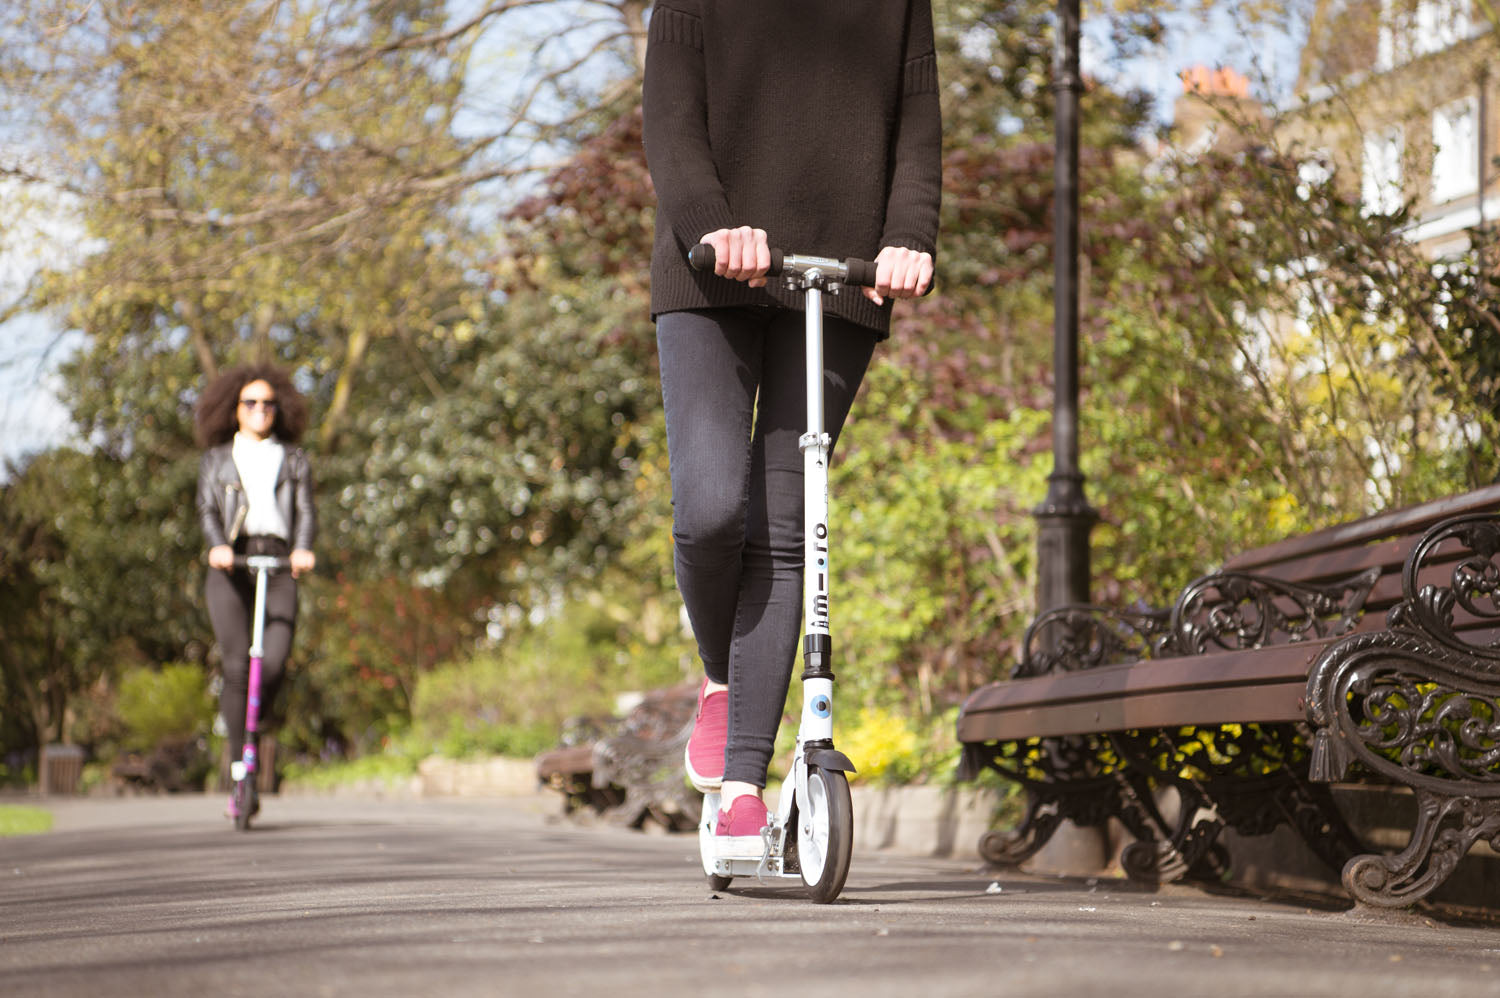 An active travel plan means healthier, happier staff